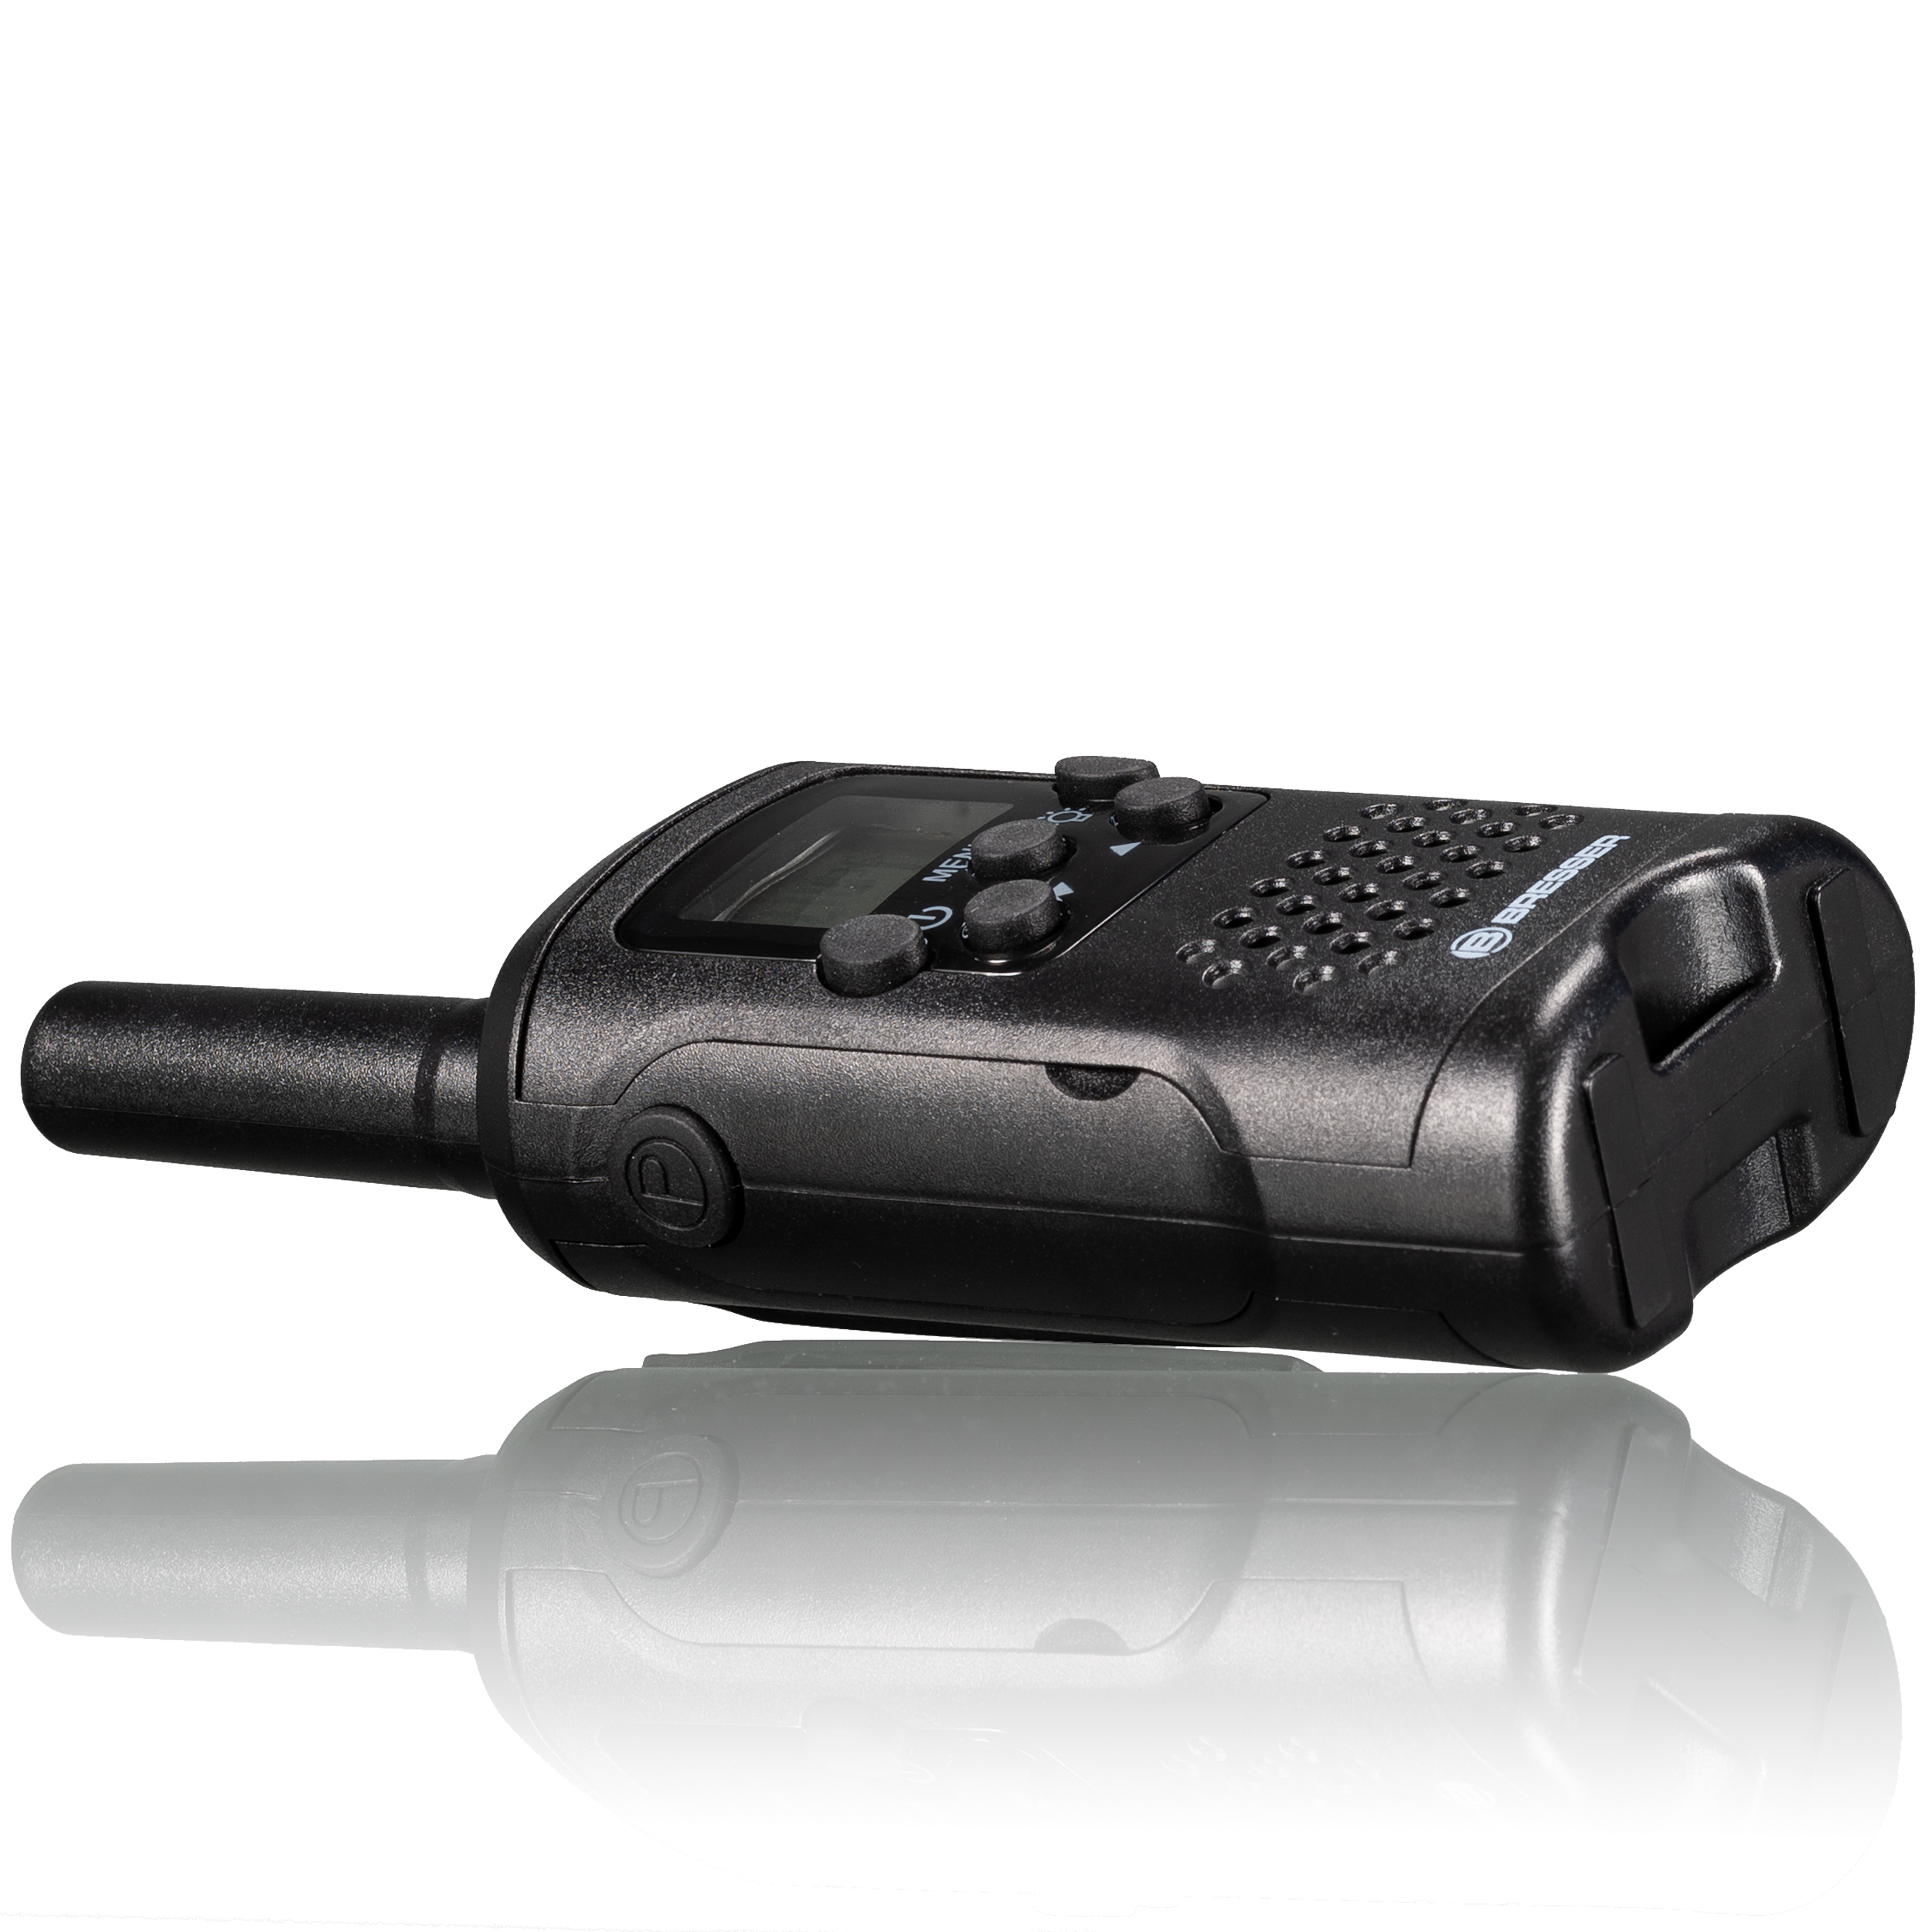 BRESSER FM Walkie Talkie 2piece Set with large range up to 6 km and free hand mode